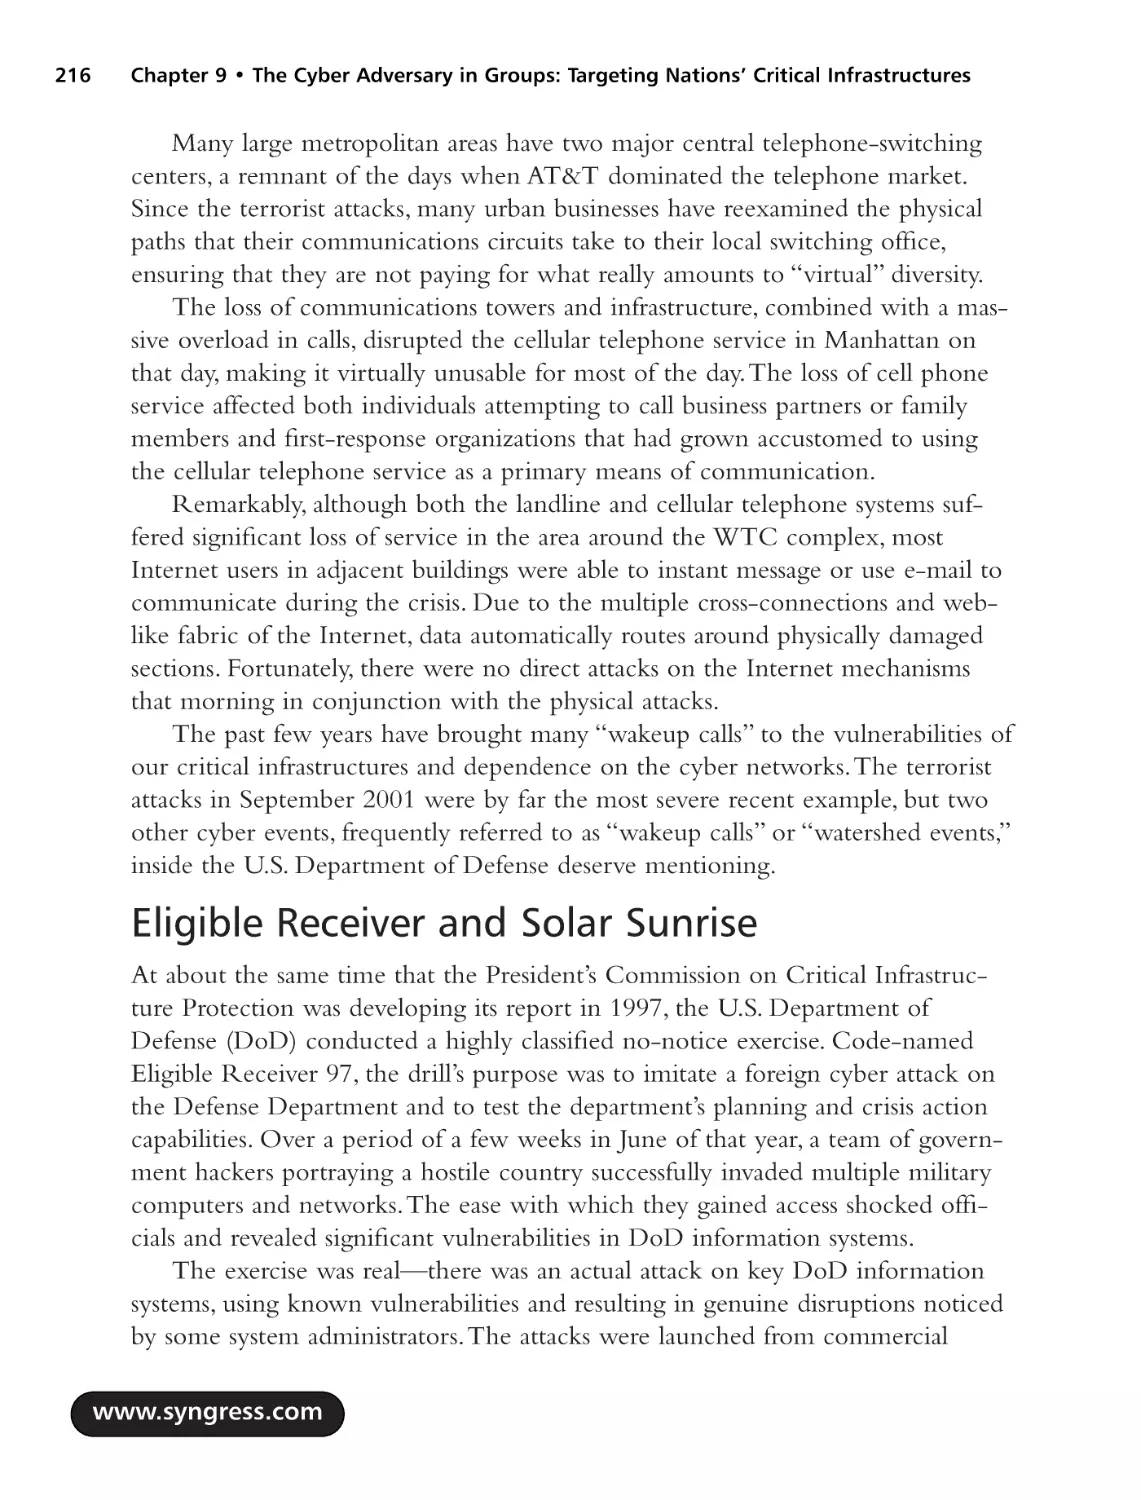 Eligible Receiver and Solar Sunrise